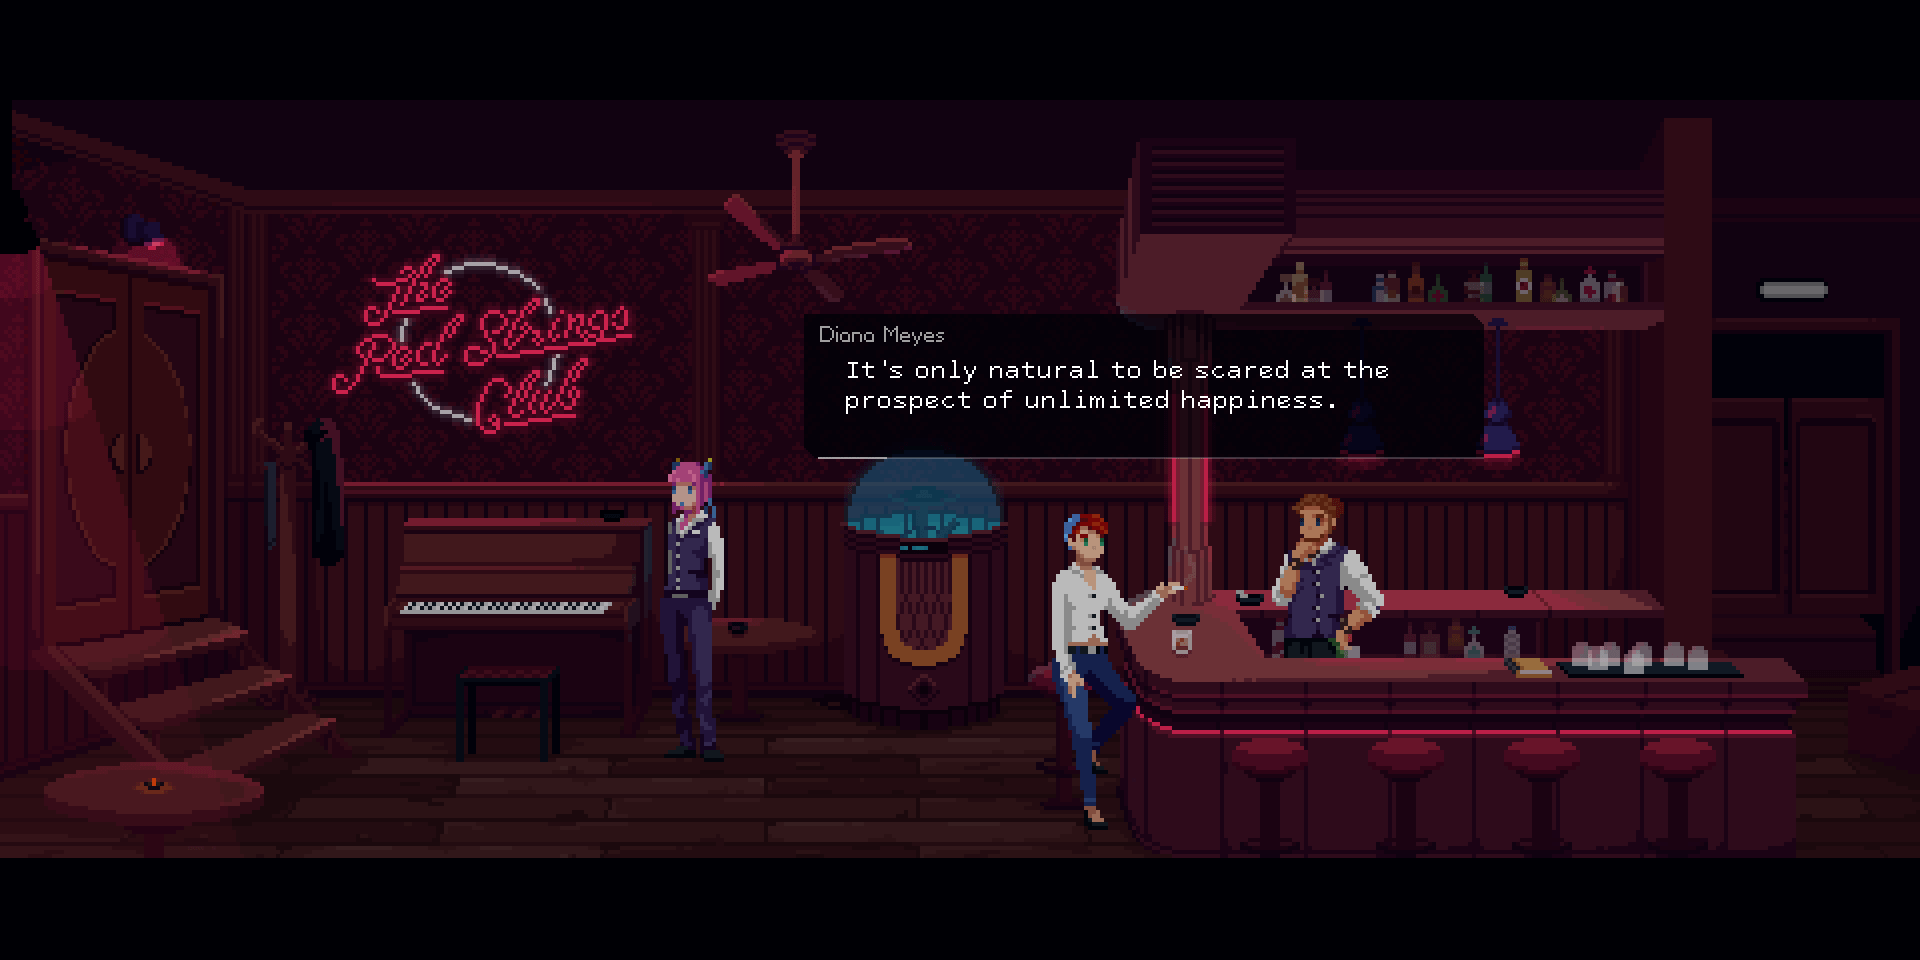 A Cyberpunk Game Where You Manipulate People With Alcohol